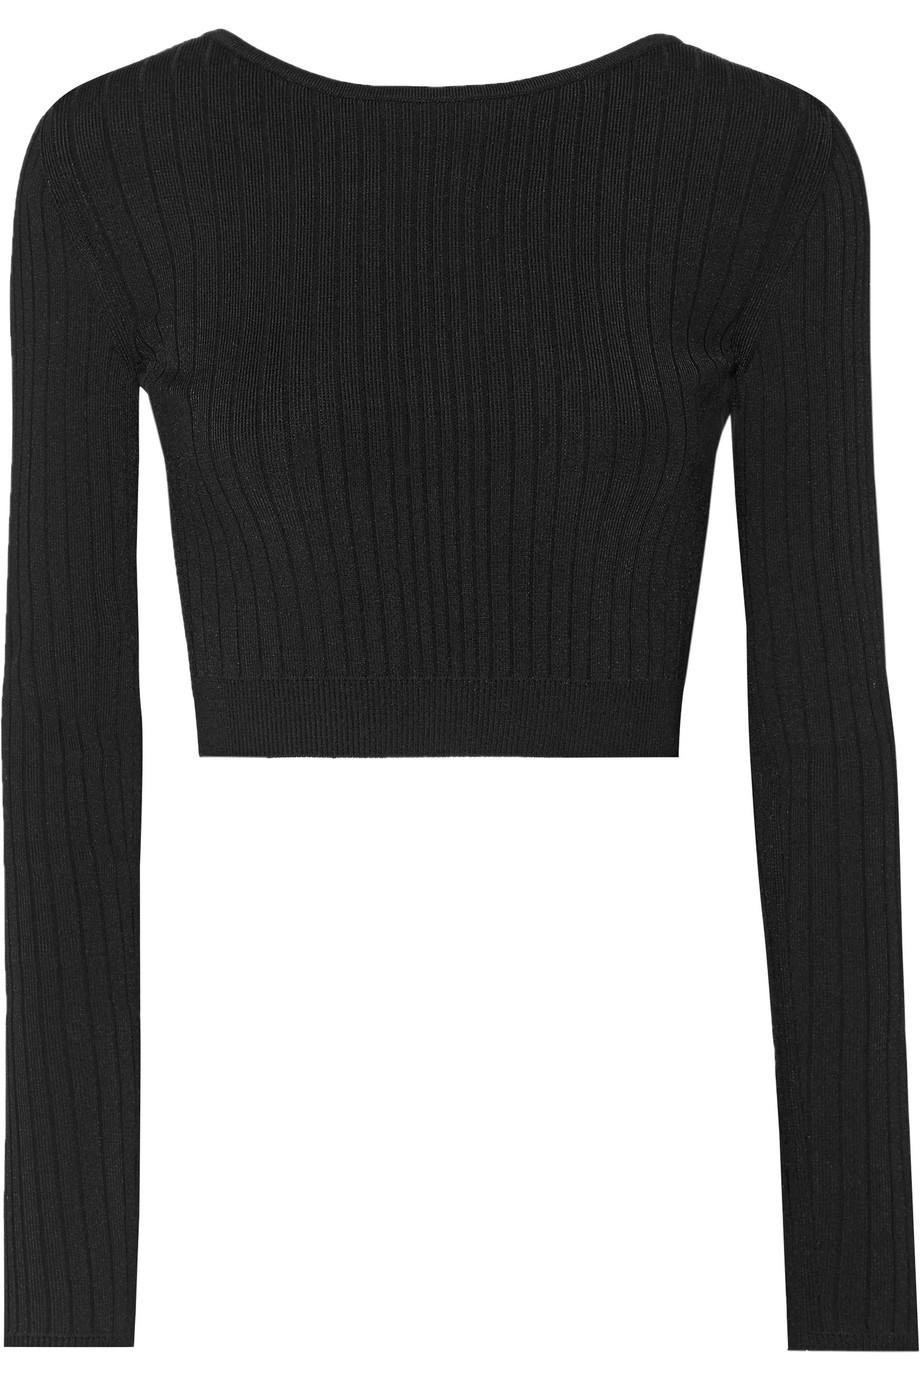 Cushnie Et Ochs Cropped Lace-up Ribbed Stretch-knit Top | ModeSens